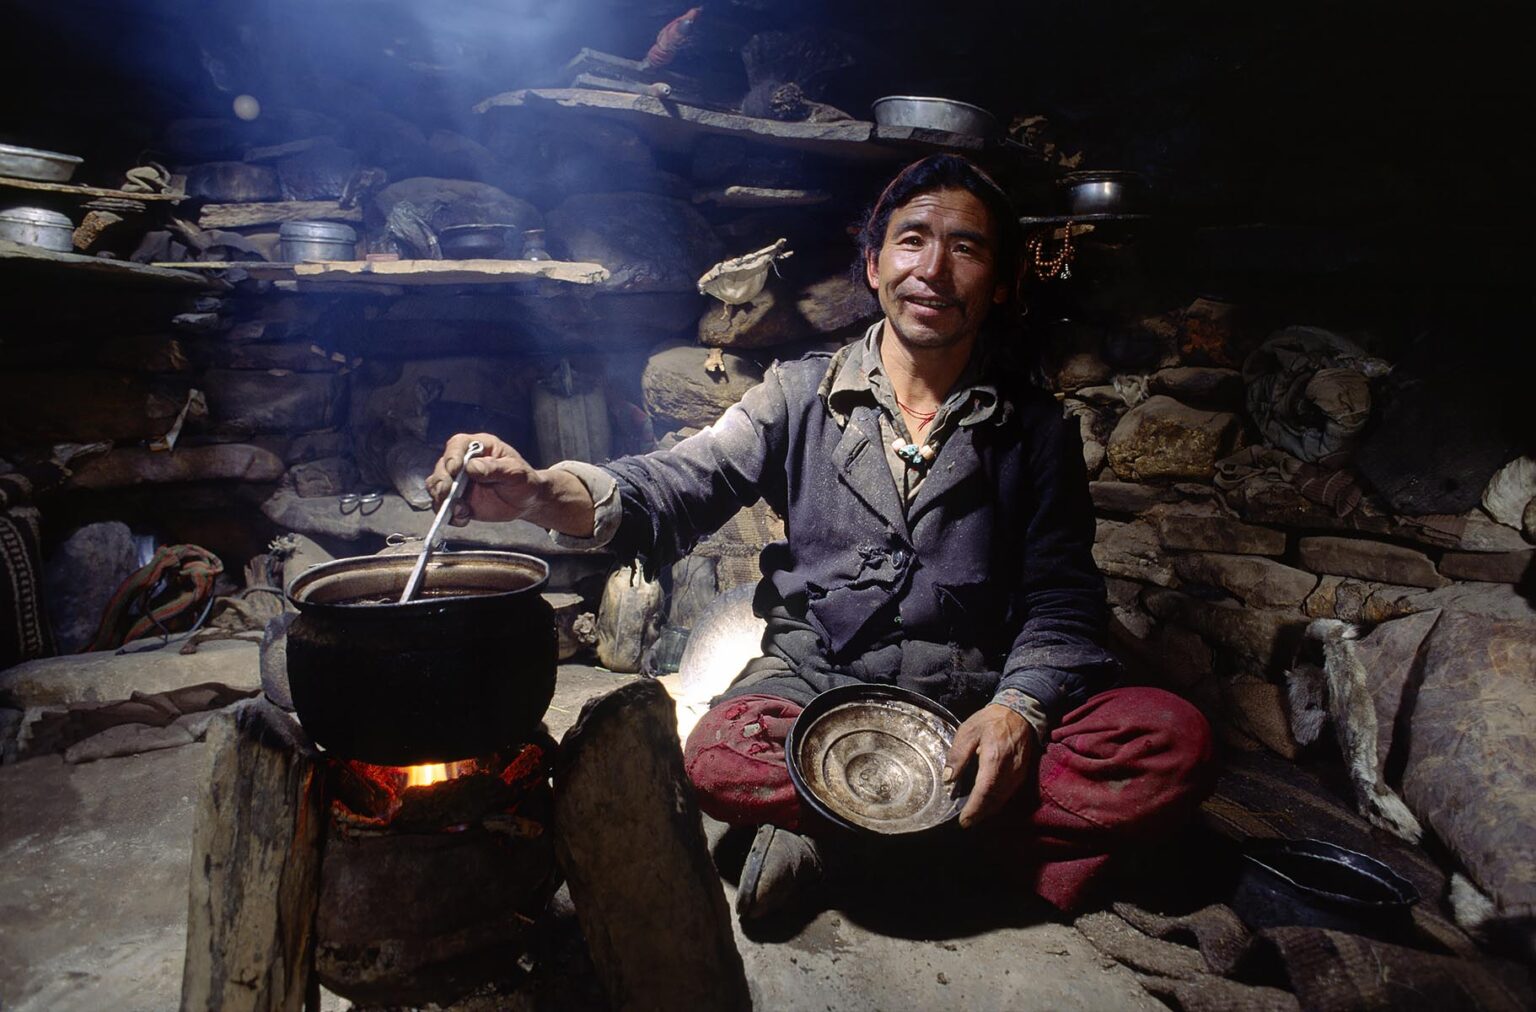 A DOLPO MAN COOKING FOOD with KITCHEN UTENSILS in a yak herder hut - DOLPO DISTRICT, NEPAL